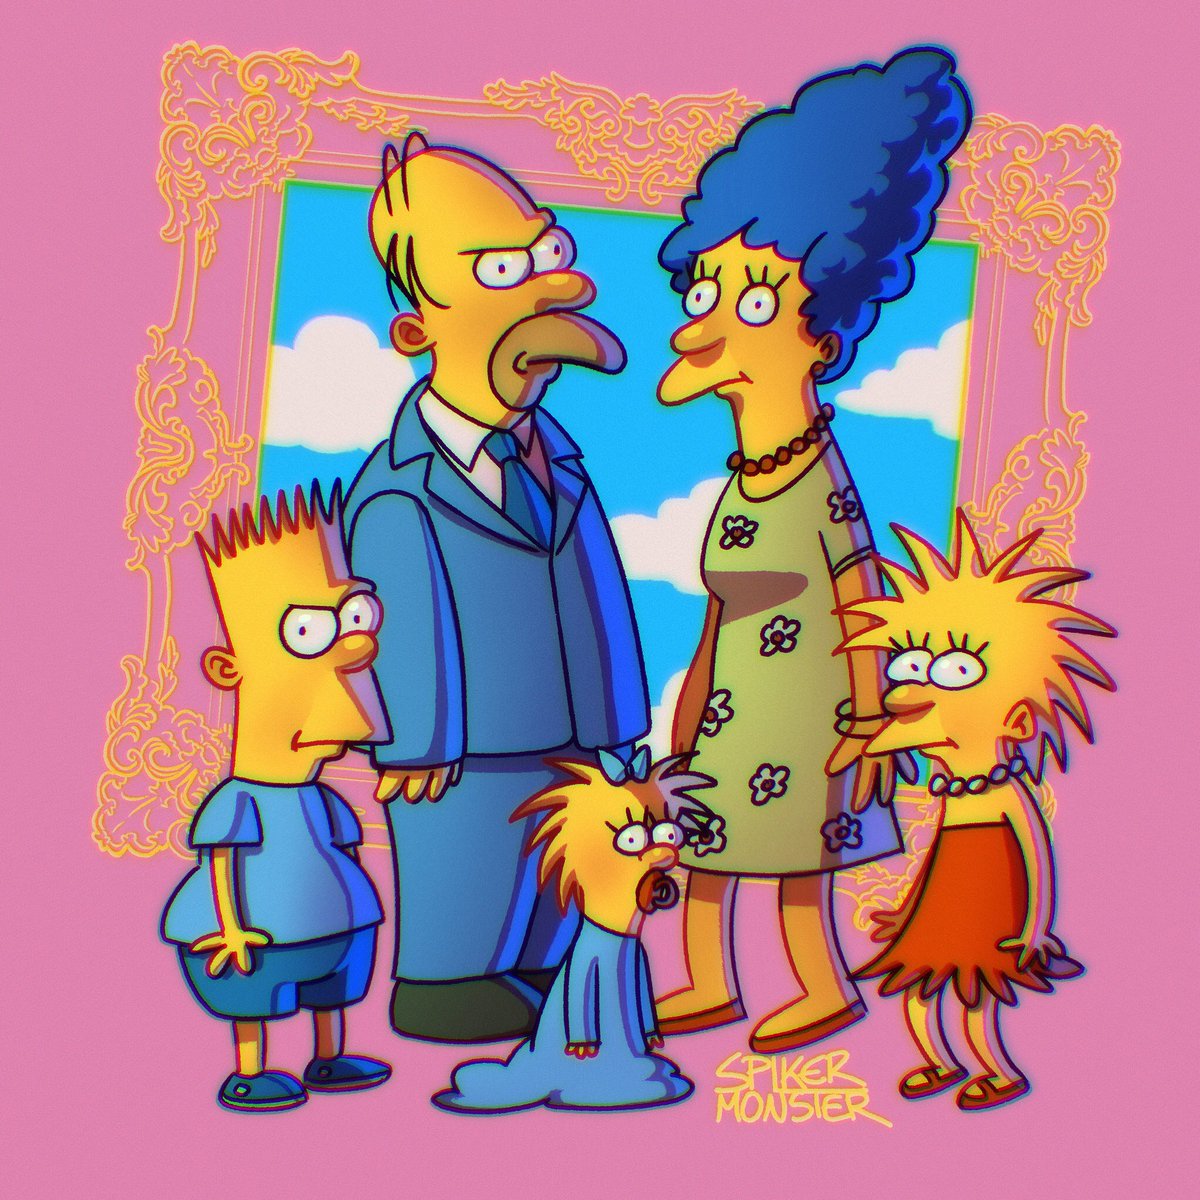 happy simpsons day 🍩 37 years since their tracey ullman debut!! #TheSimpsons